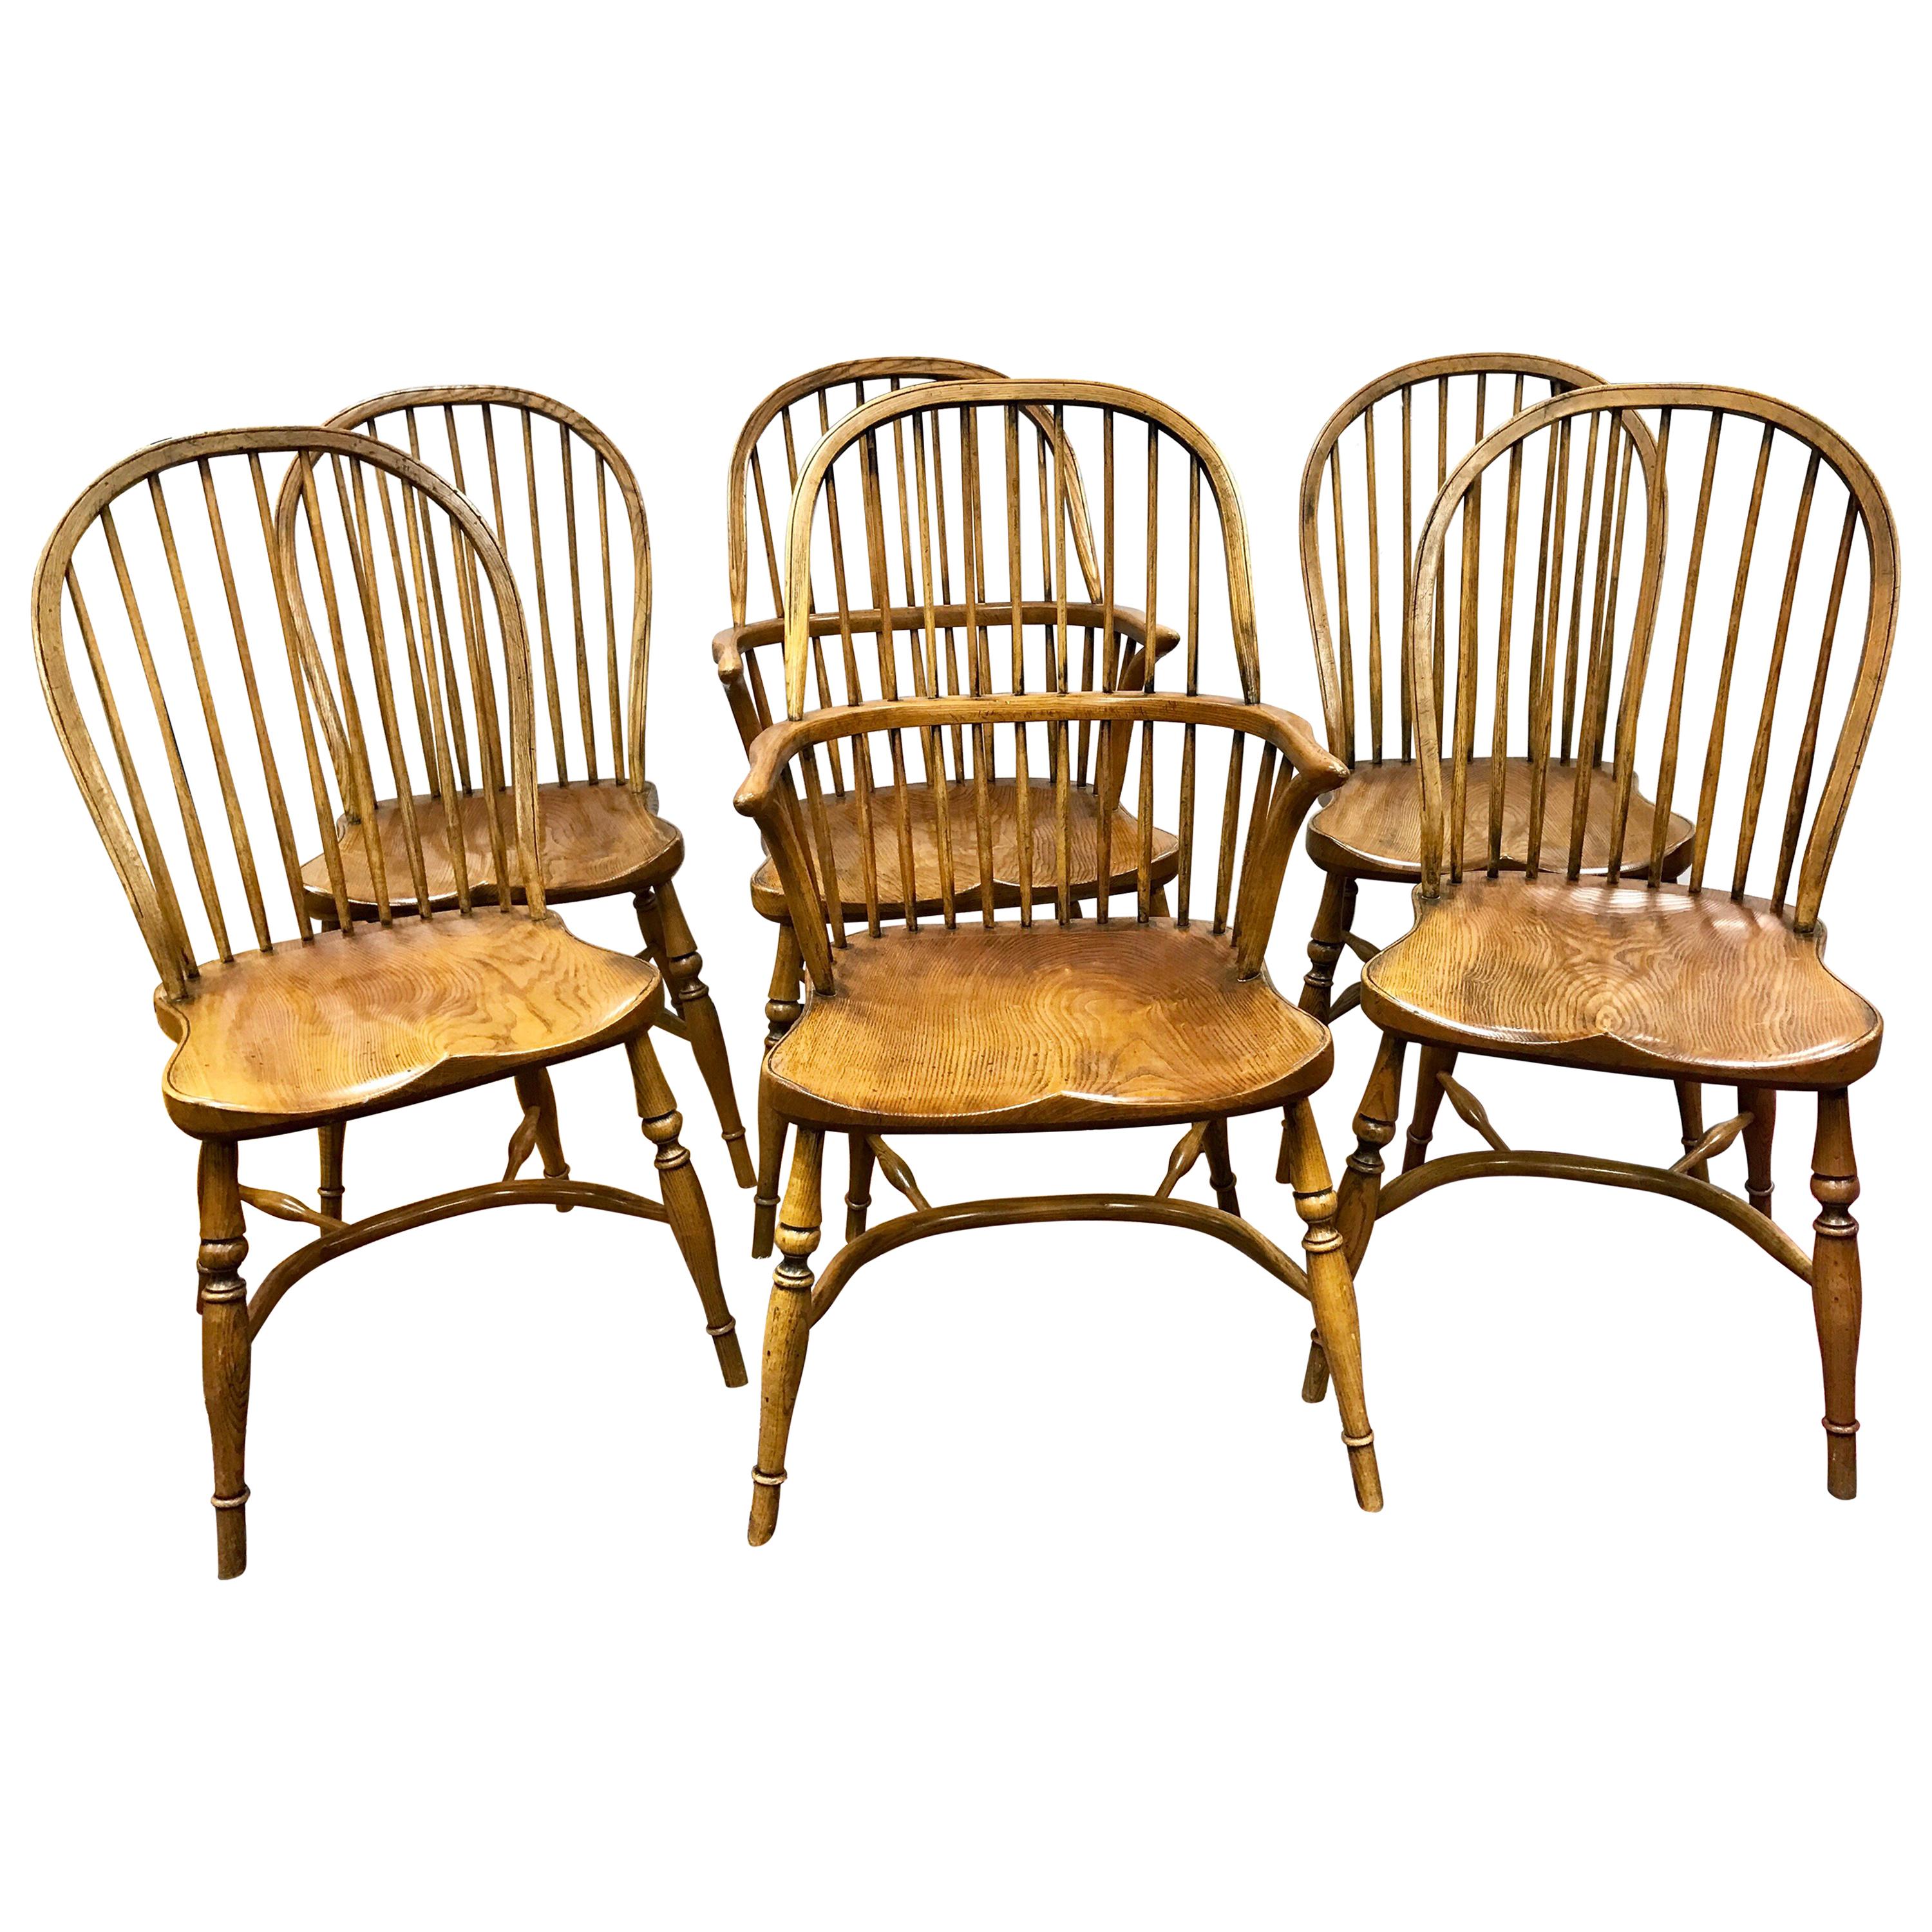 English Handcrafted Oak Wood Windsor Spindle Back Dining Chairs